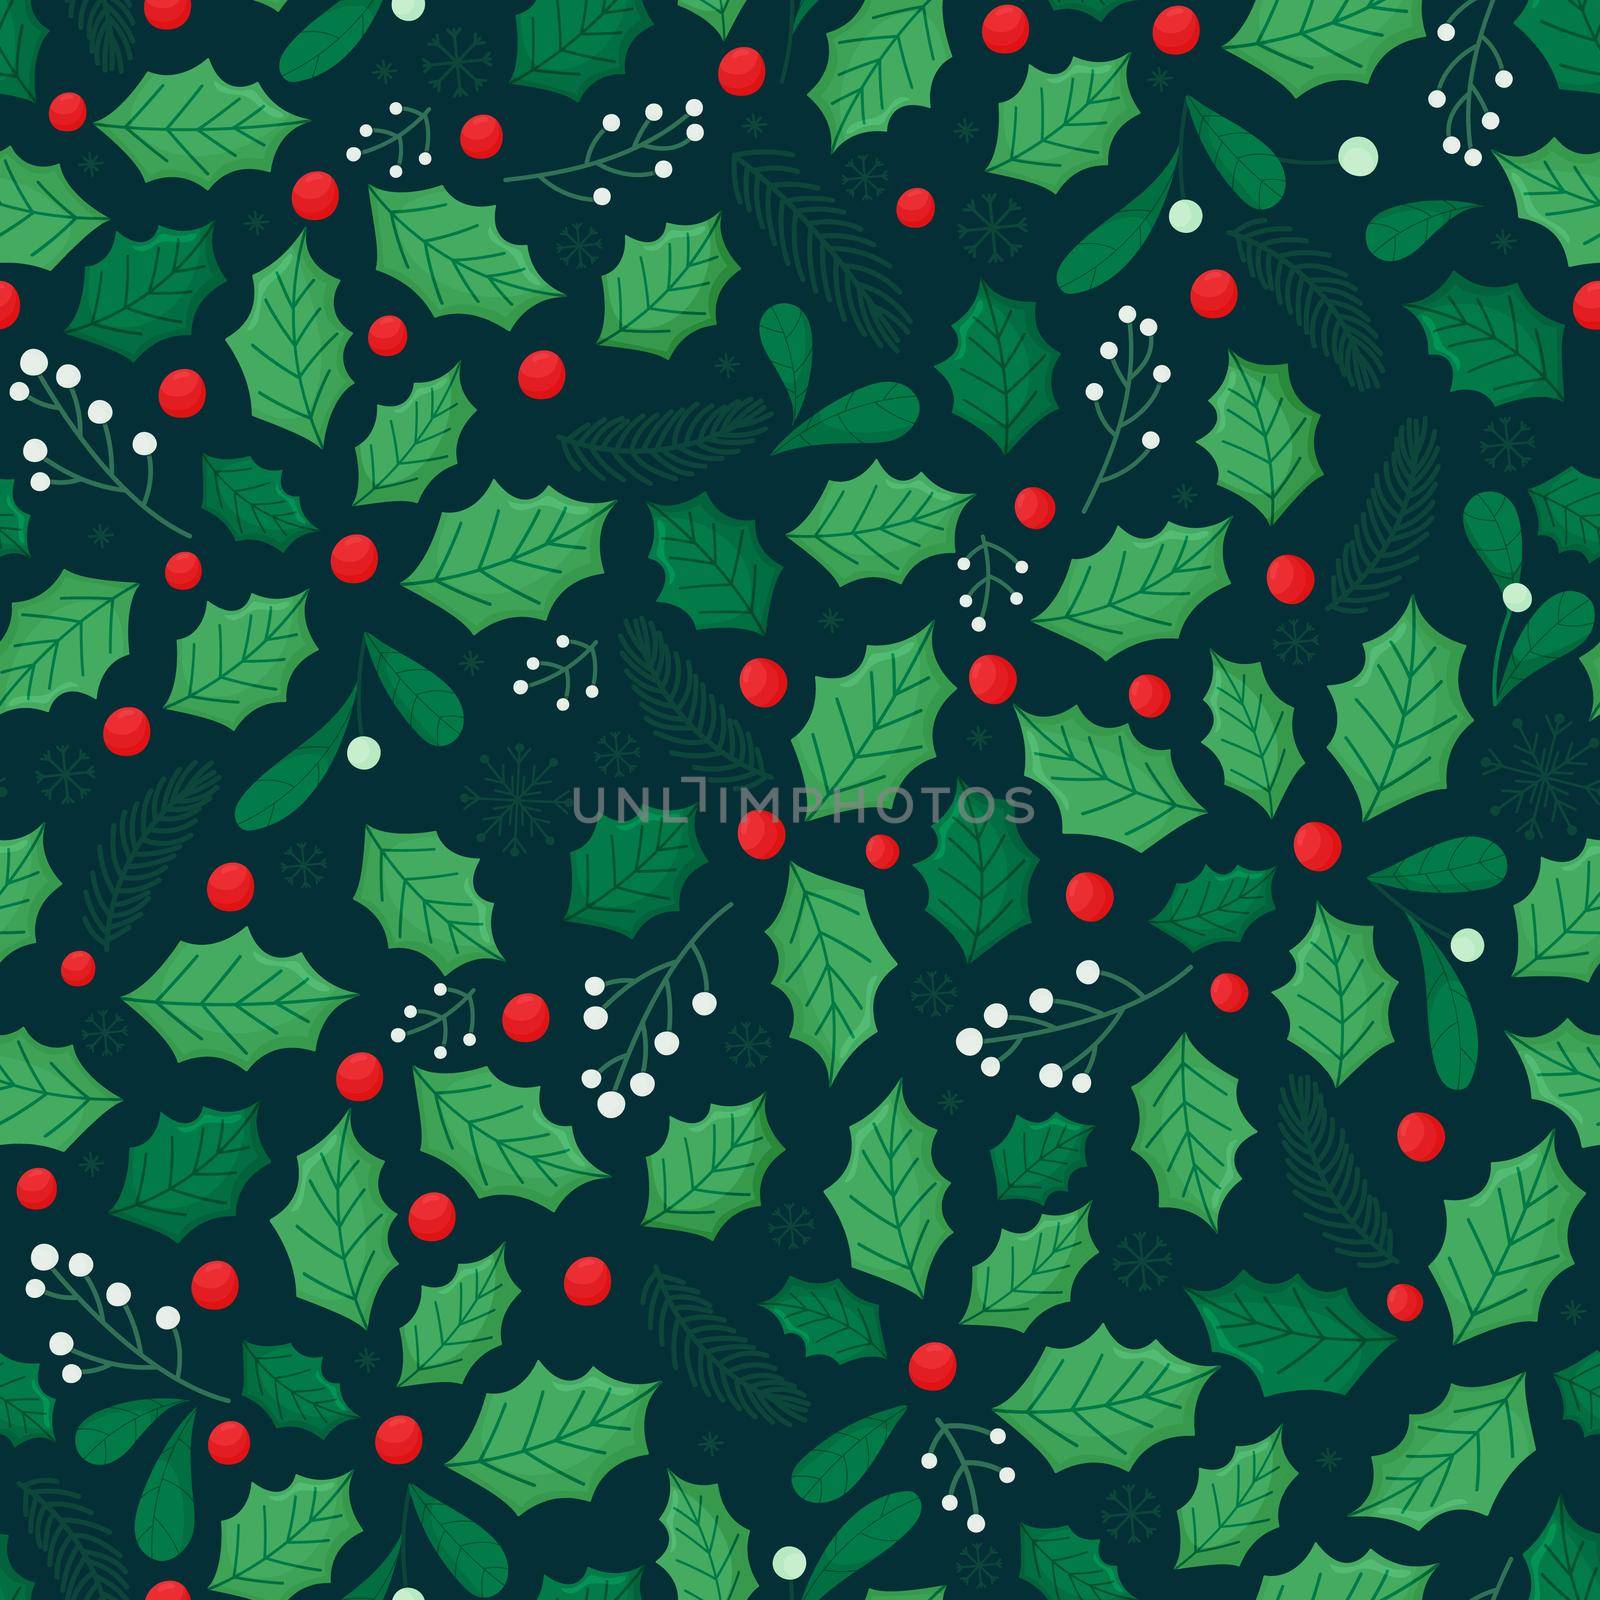 Seamless Christmas pattern with holly leaves, fir branches, green leaves and berries on a dark green background. Vector illustration.